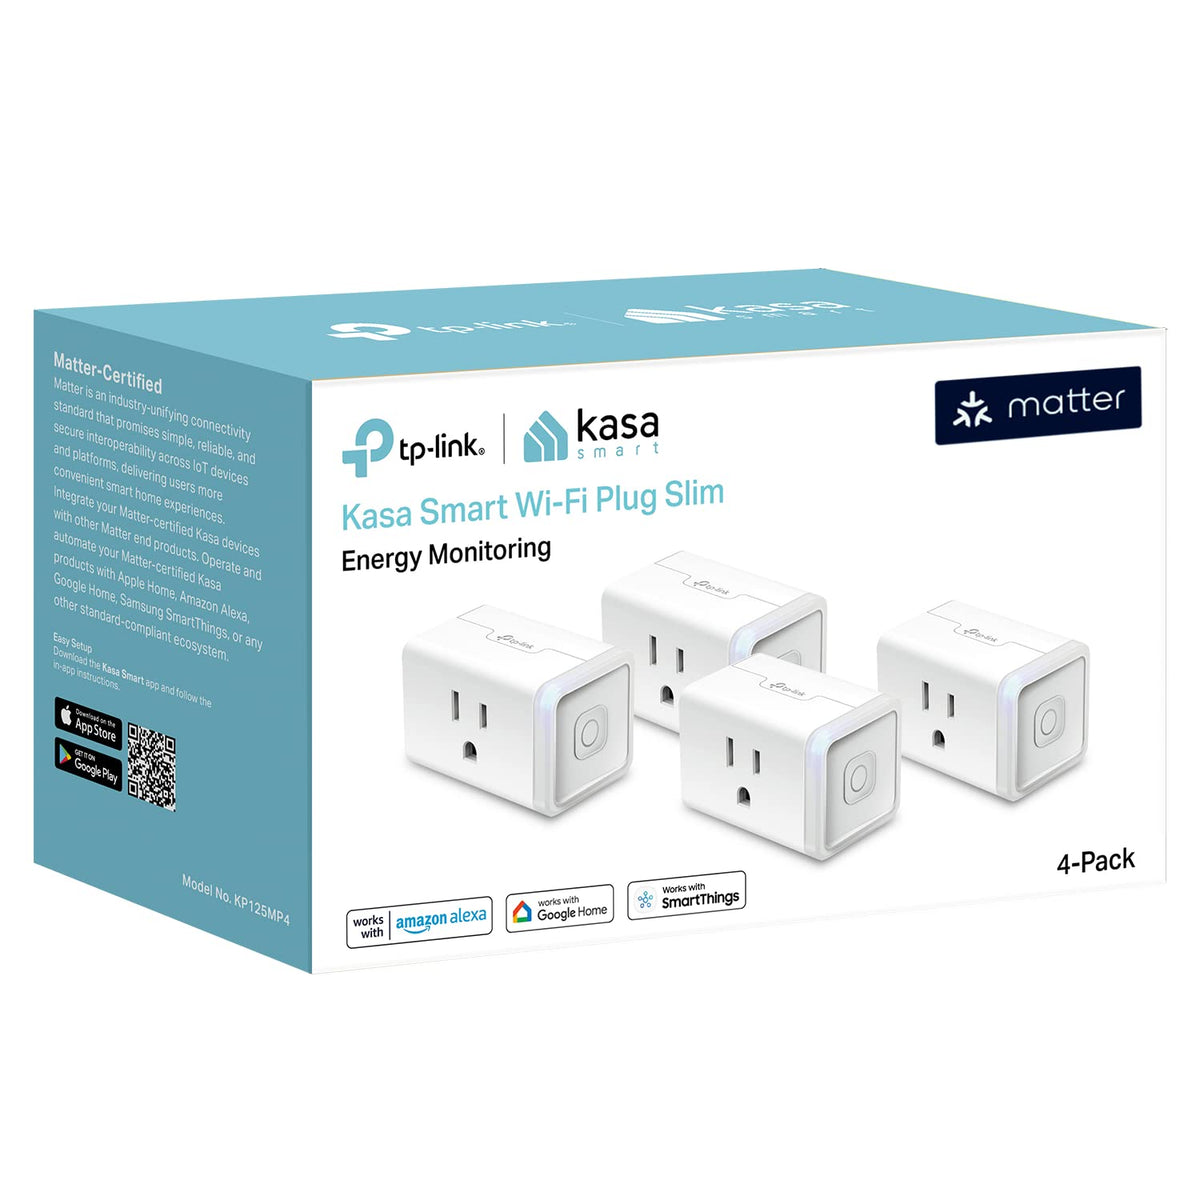 Kasa Matter Smart Plug w/ Energy Monitoring, Compact Design, 15A/1800W Max, Super Easy Setup, Works with Apple Home, Alexa & Google Home, UL Certified, 2.4G Wi-Fi Only, White, KP125M (4-Pack)